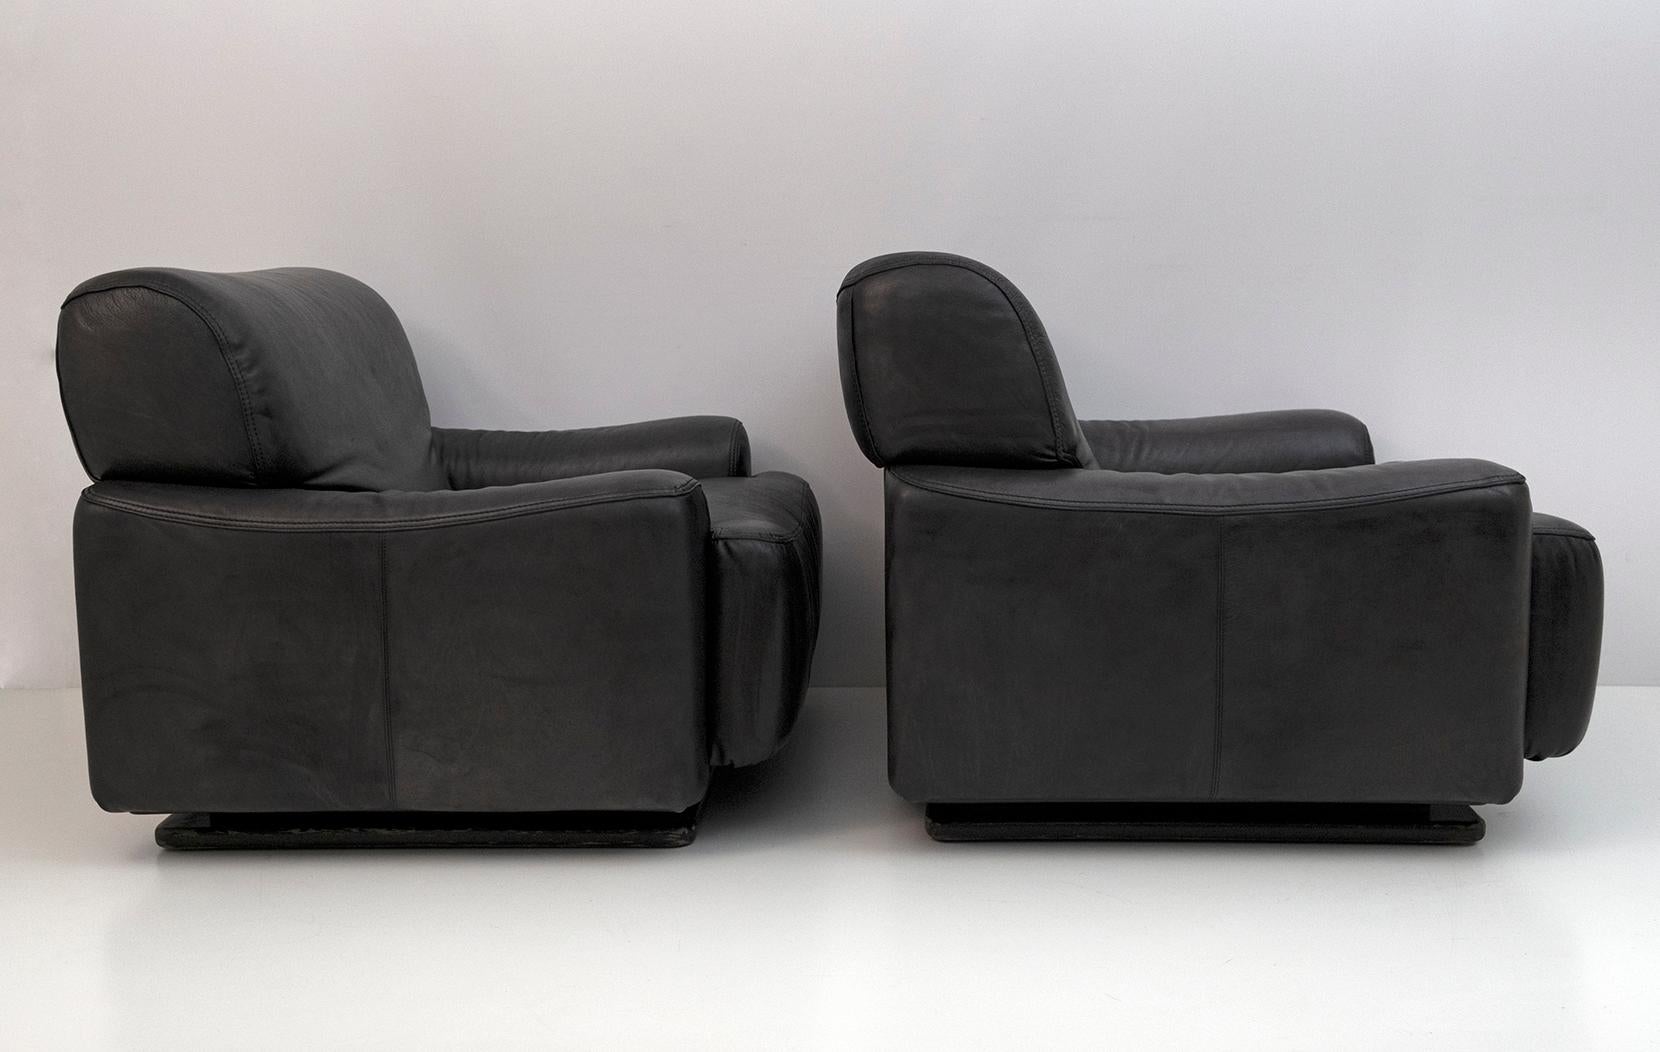 Pair of Busnelli Mid-Century Modern Italian Leather Armchairs, 1970s For Sale 1